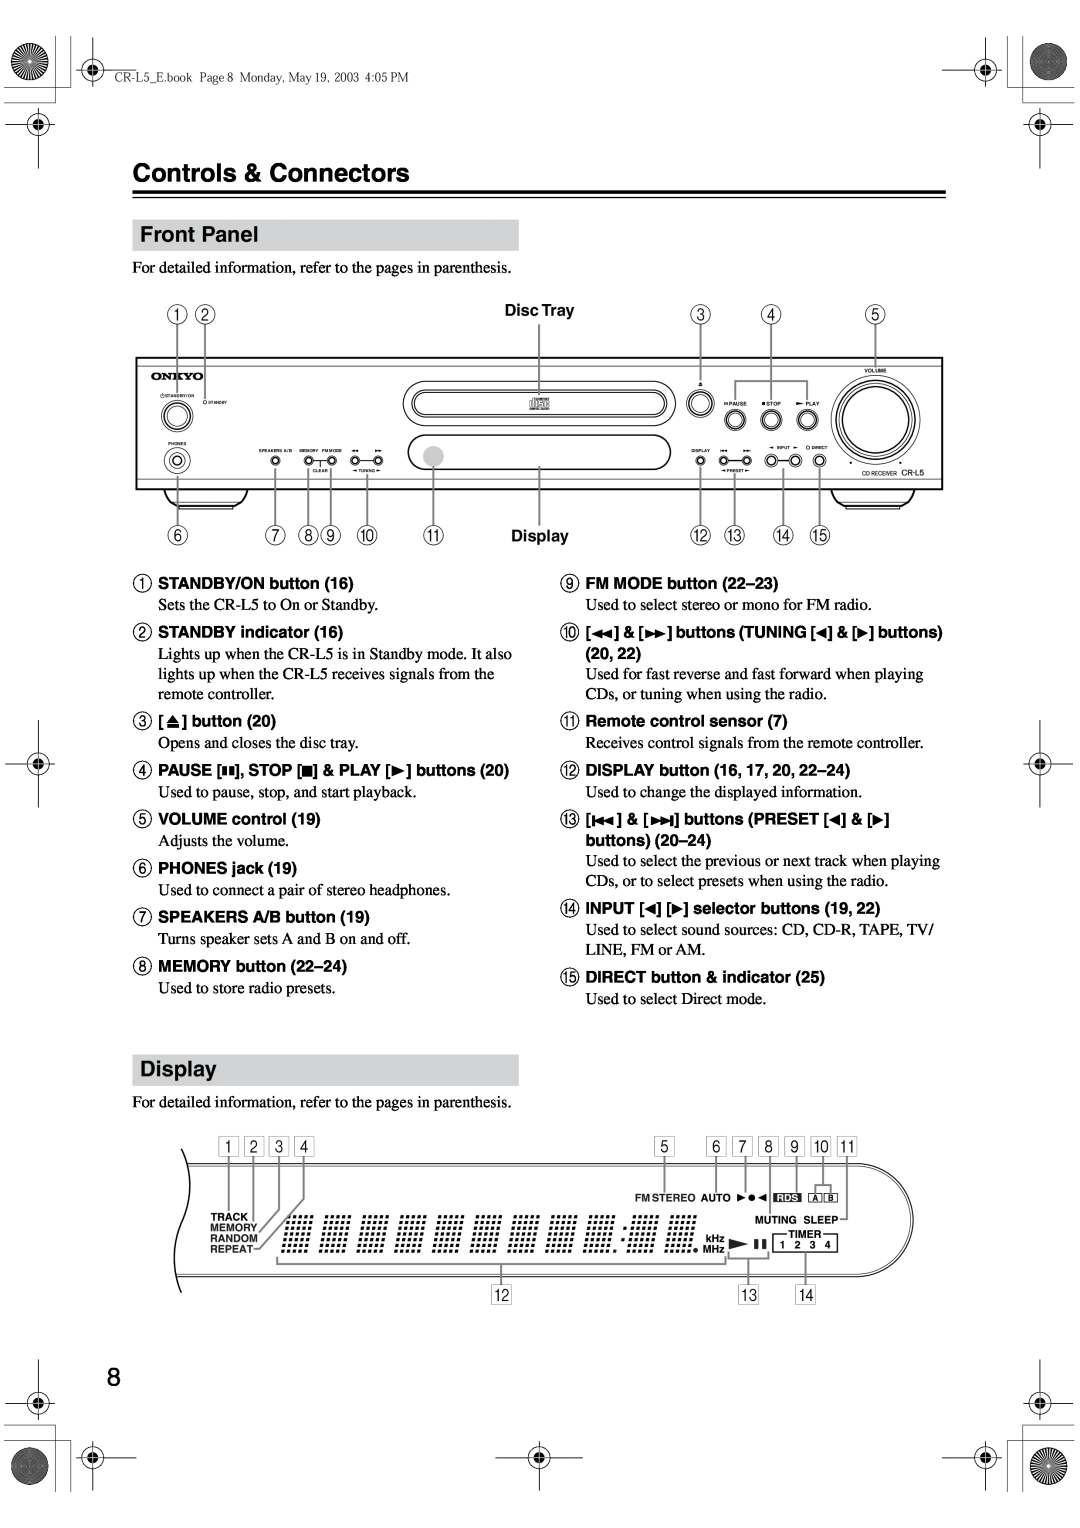 Onkyo Controls & Connectors, Front Panel, Display, 7 89 J, 6 7 8 9 0 A, Bc D, Sets the CR-L5to On or Standby 